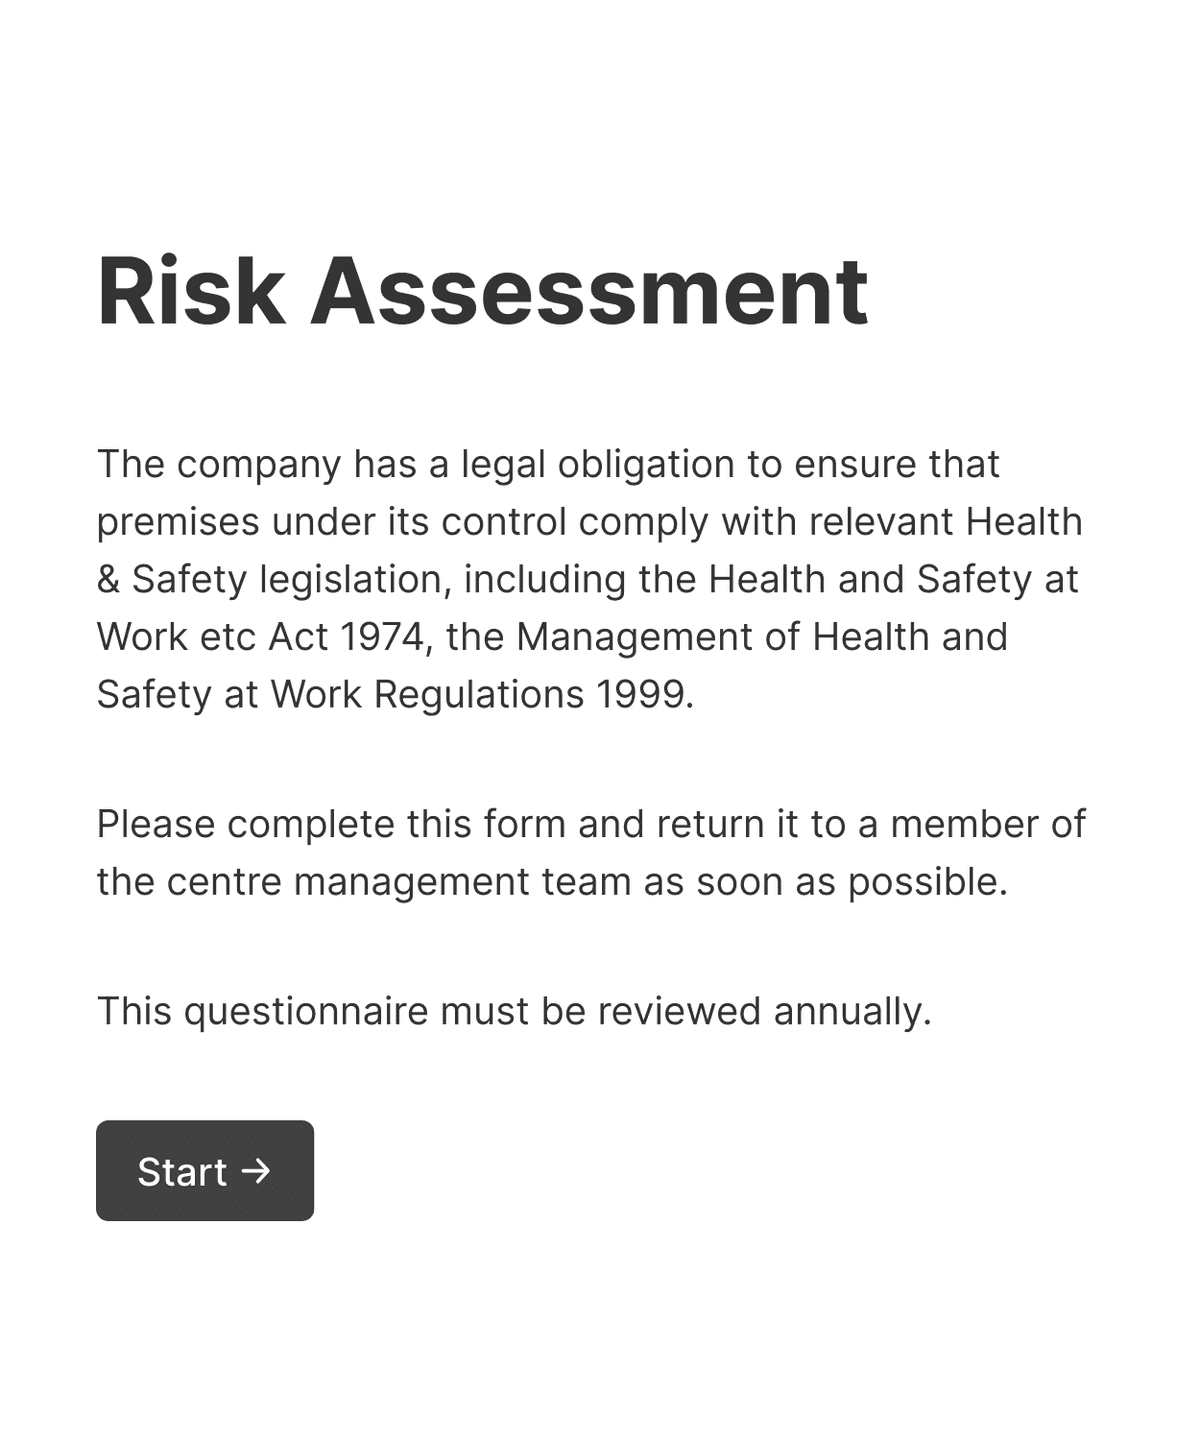 Welcome step of 'Customer risk assessment questionnaire' with introduction text, and a 'Start' button